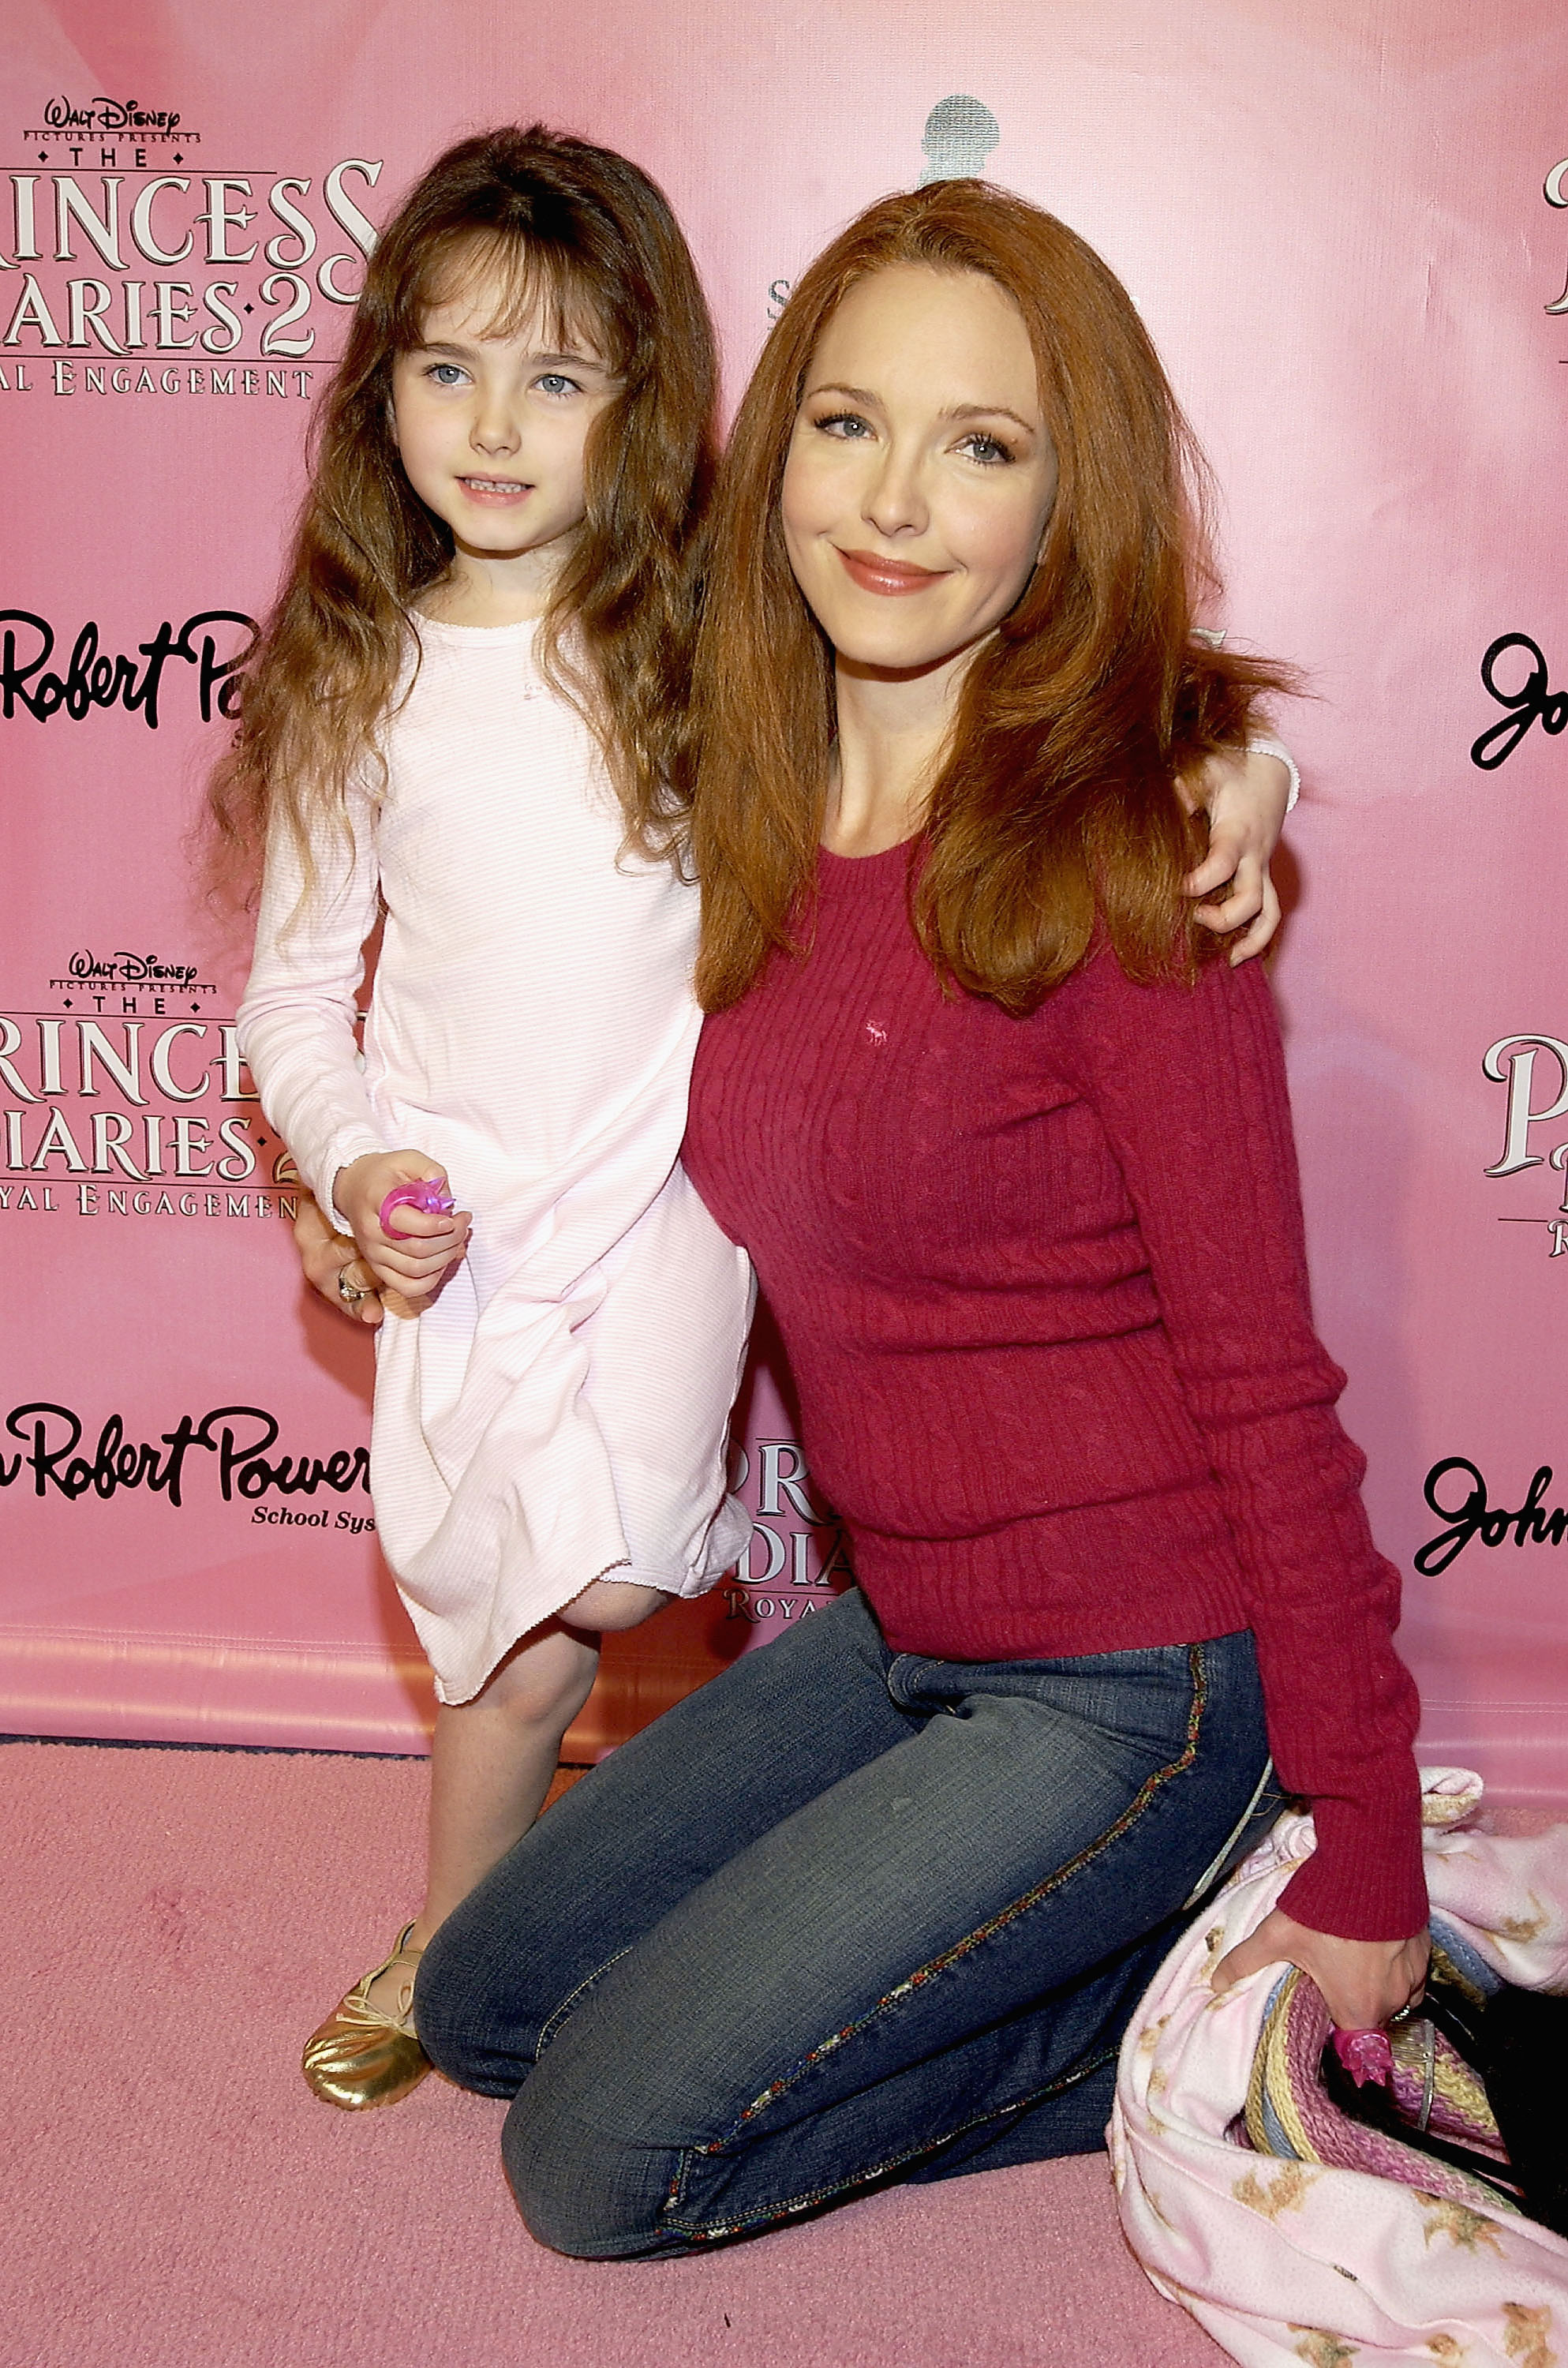 Stella Ritter and Amy Yasbeck at "The Princess Diaries 2: Royal Enagement" DVD Pajama Party in Beverly Hills, California on December 8, 2004 | Source: Getty Images